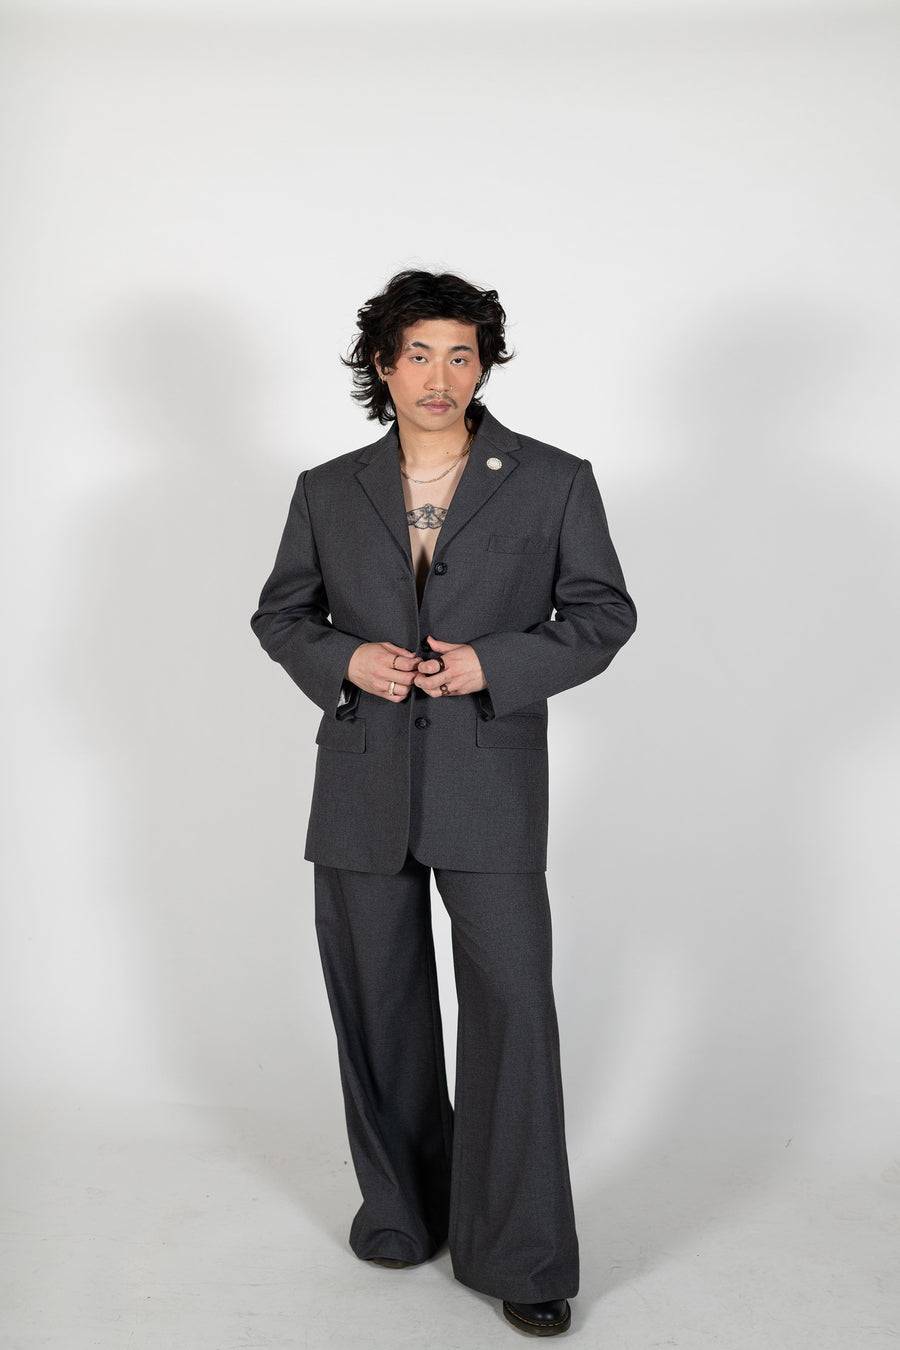 Jake wears the Acme Grey Tailored Suit Set by House of Campbell.